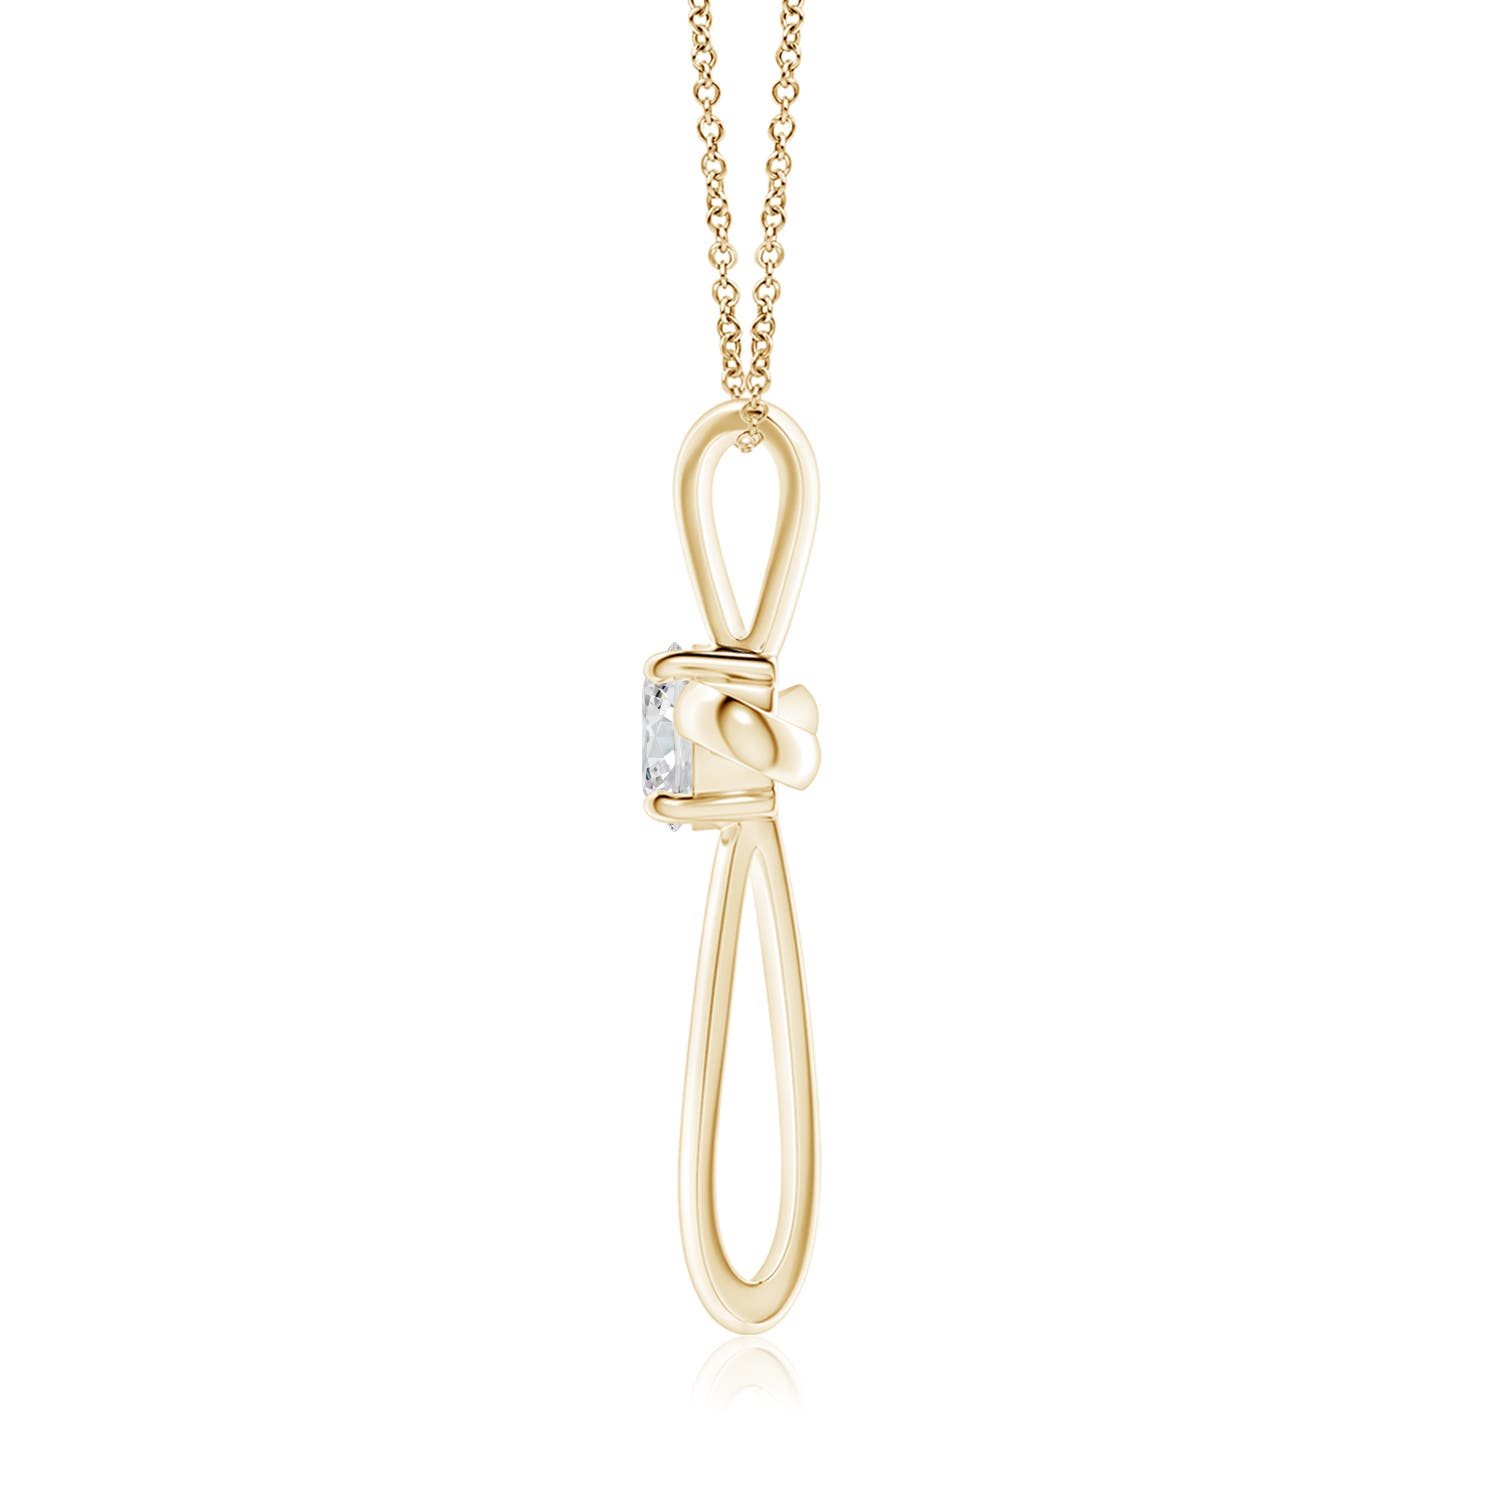 H, SI2 / 0.5 CT / 18 KT Yellow Gold